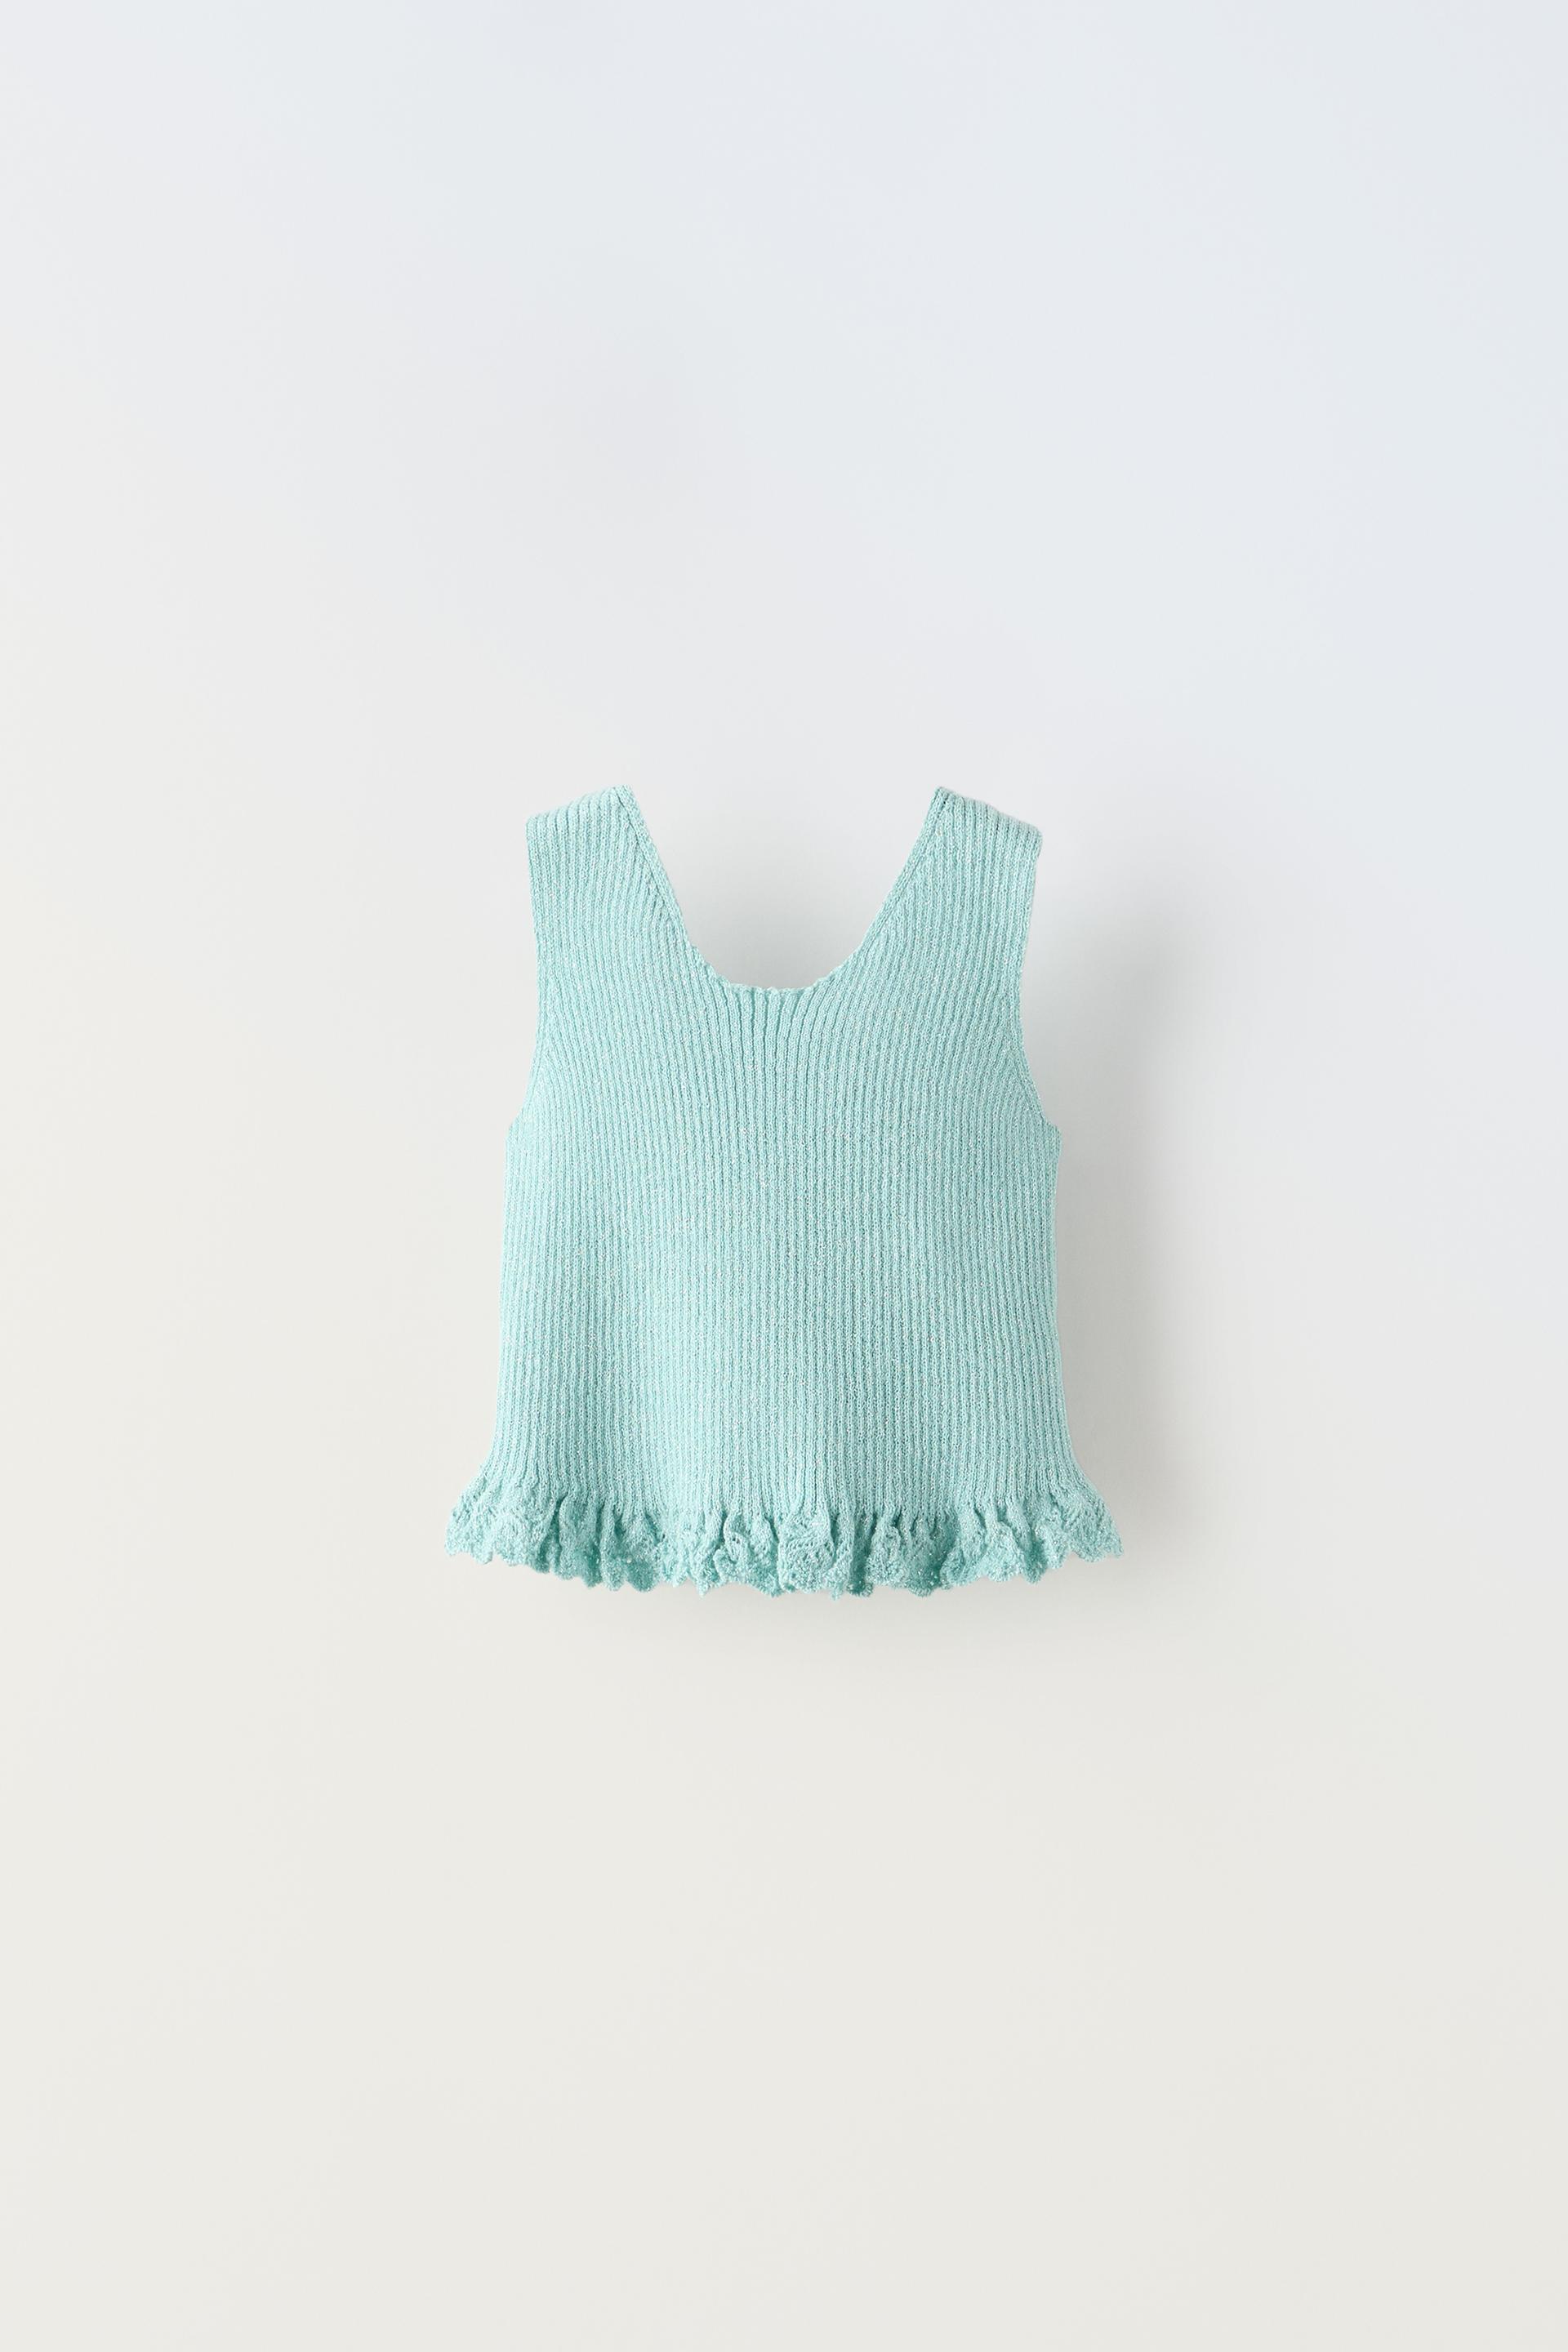 SPARKLY KNIT TOP